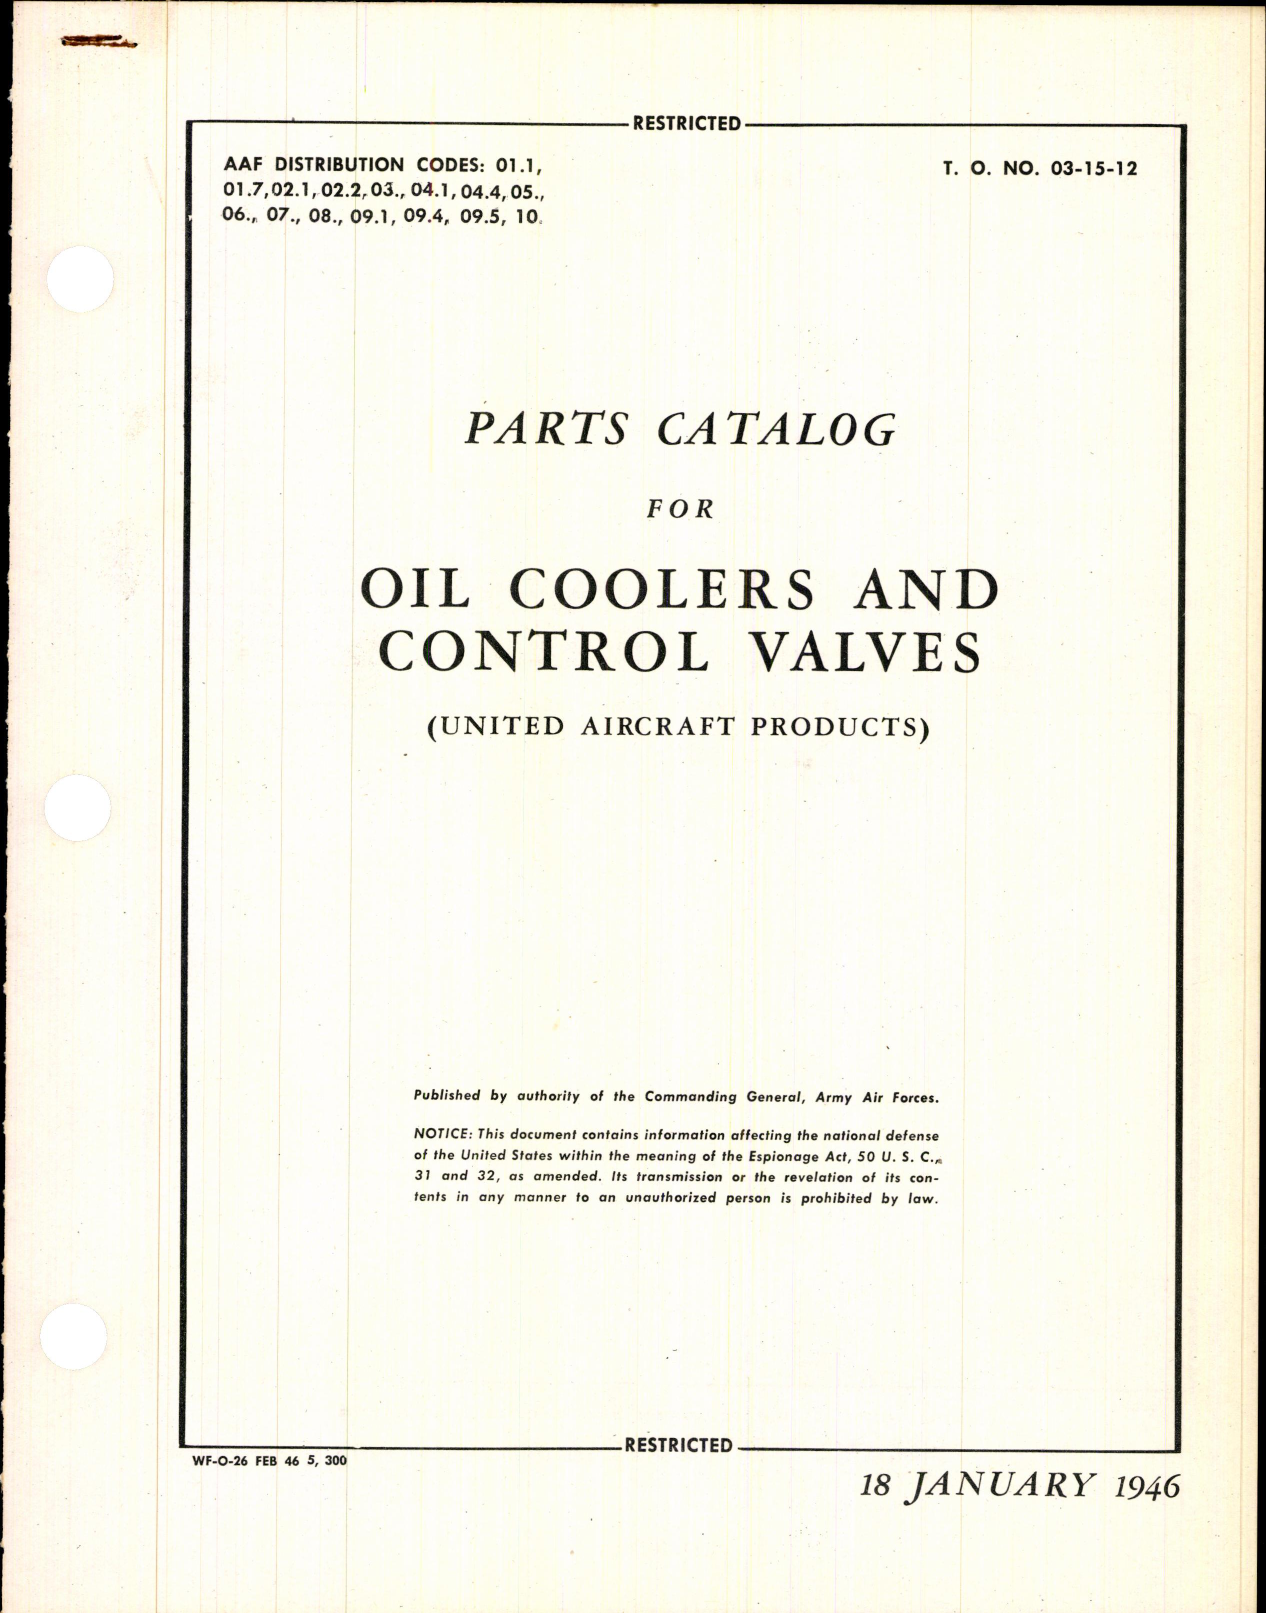 Sample page 1 from AirCorps Library document: Parts Catalog for Oil Cooler and Control Valves